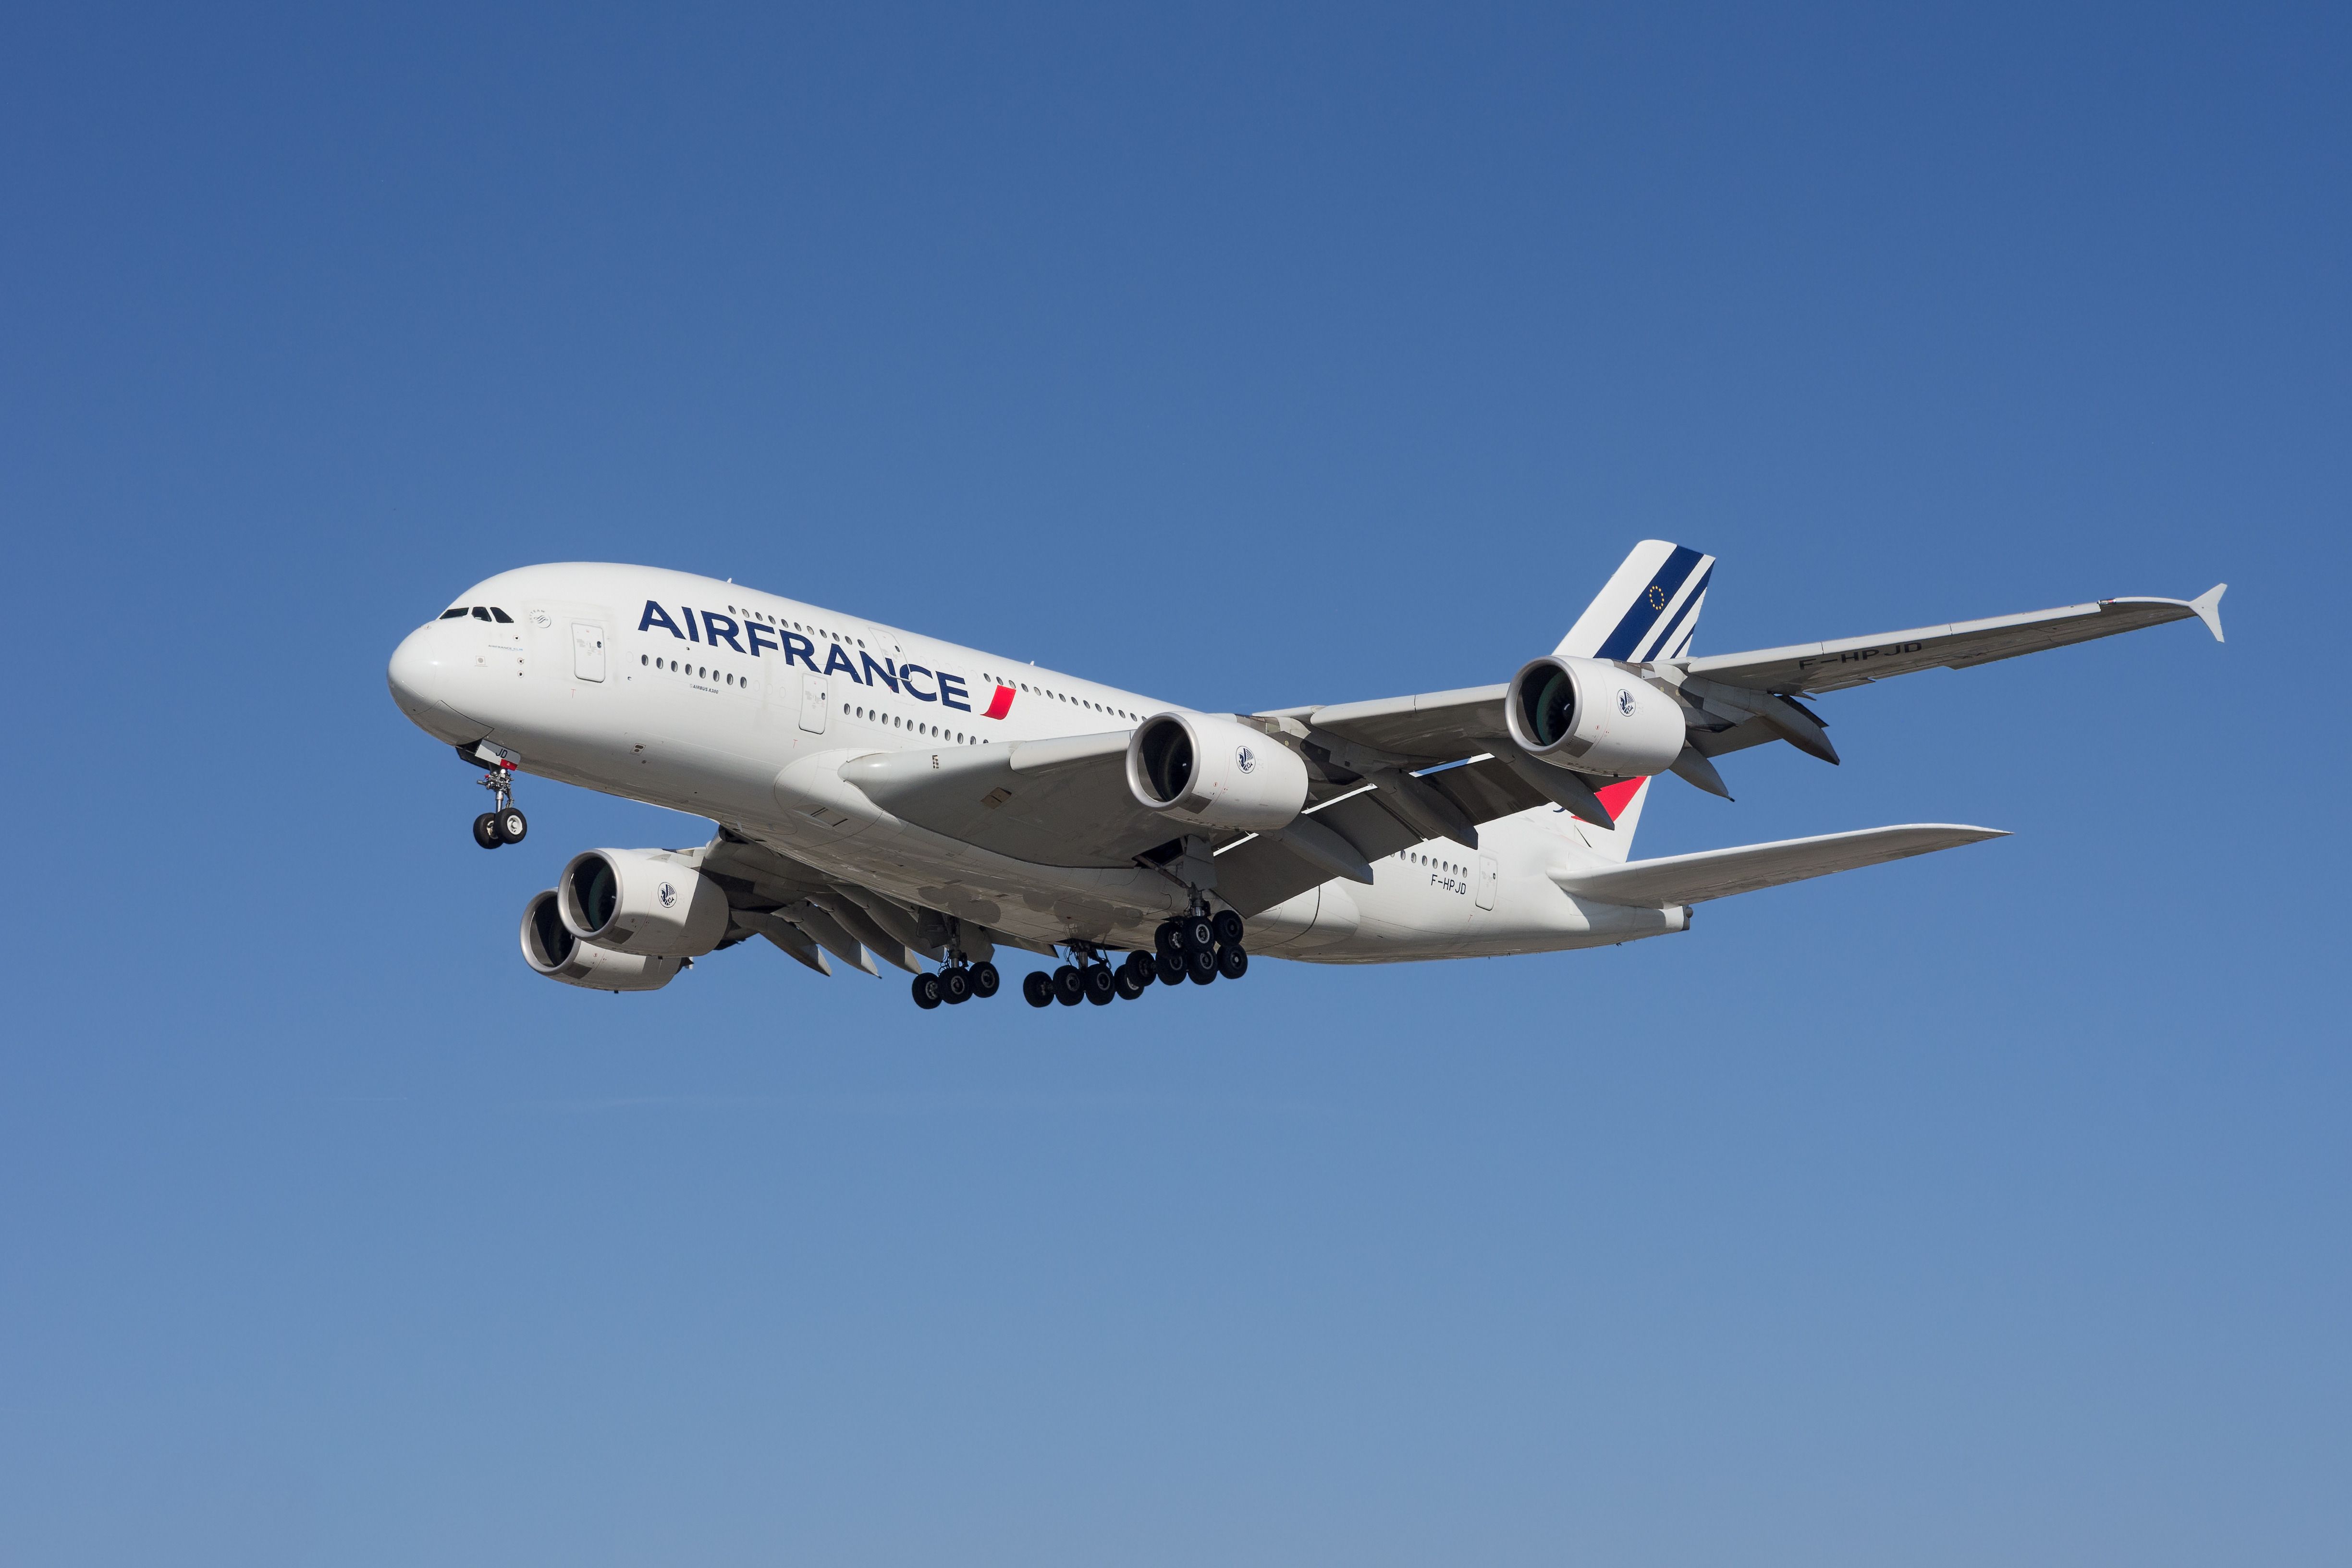 An Air France Airbus A380 flying in the sky.